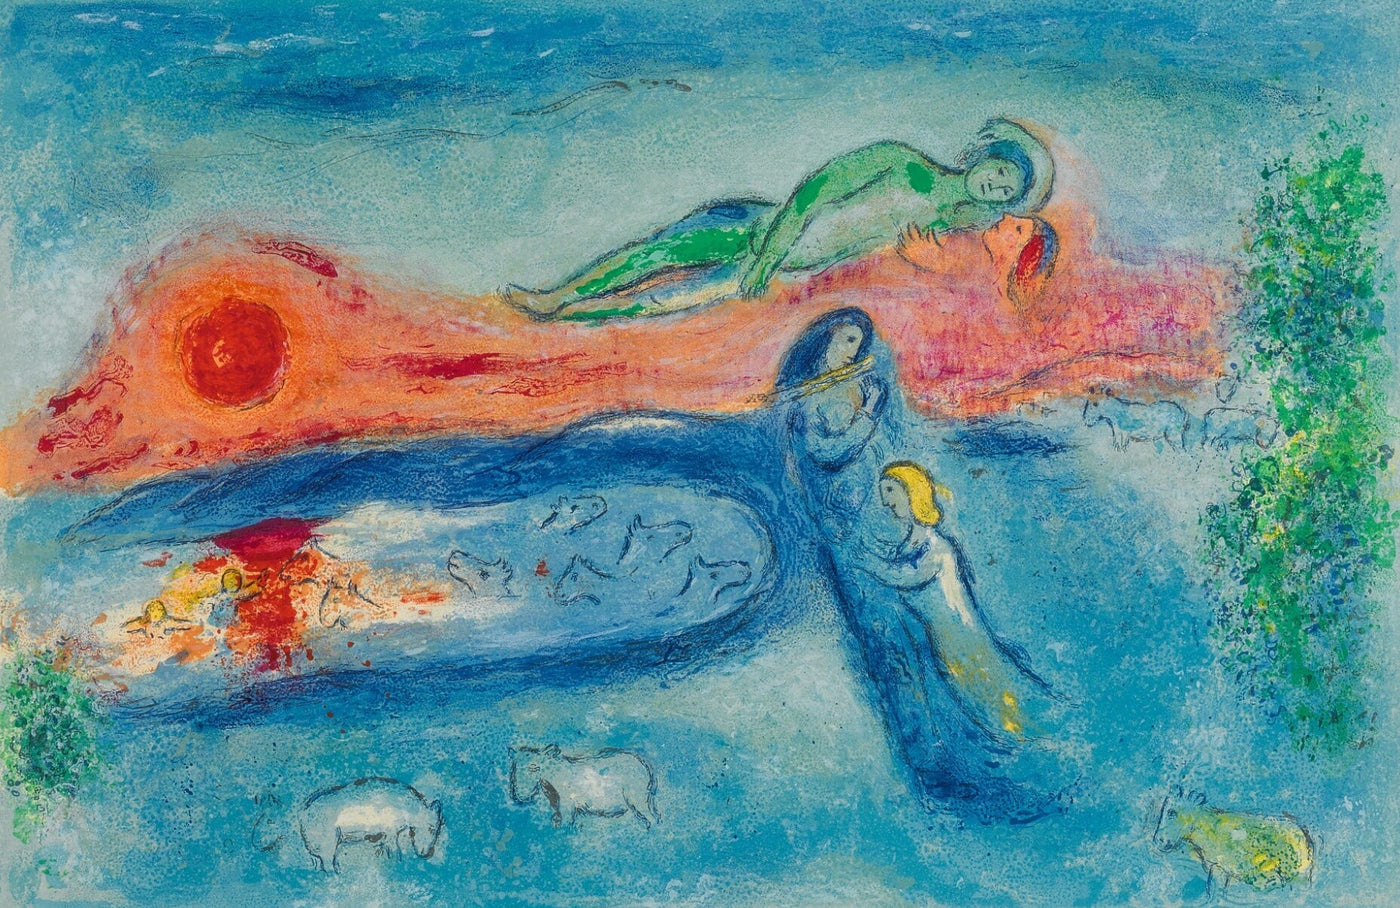 Marc Chagall The Death of Dorcon, from Daphnis and Chloe (Mourlot 320, Cramer 46) 1961